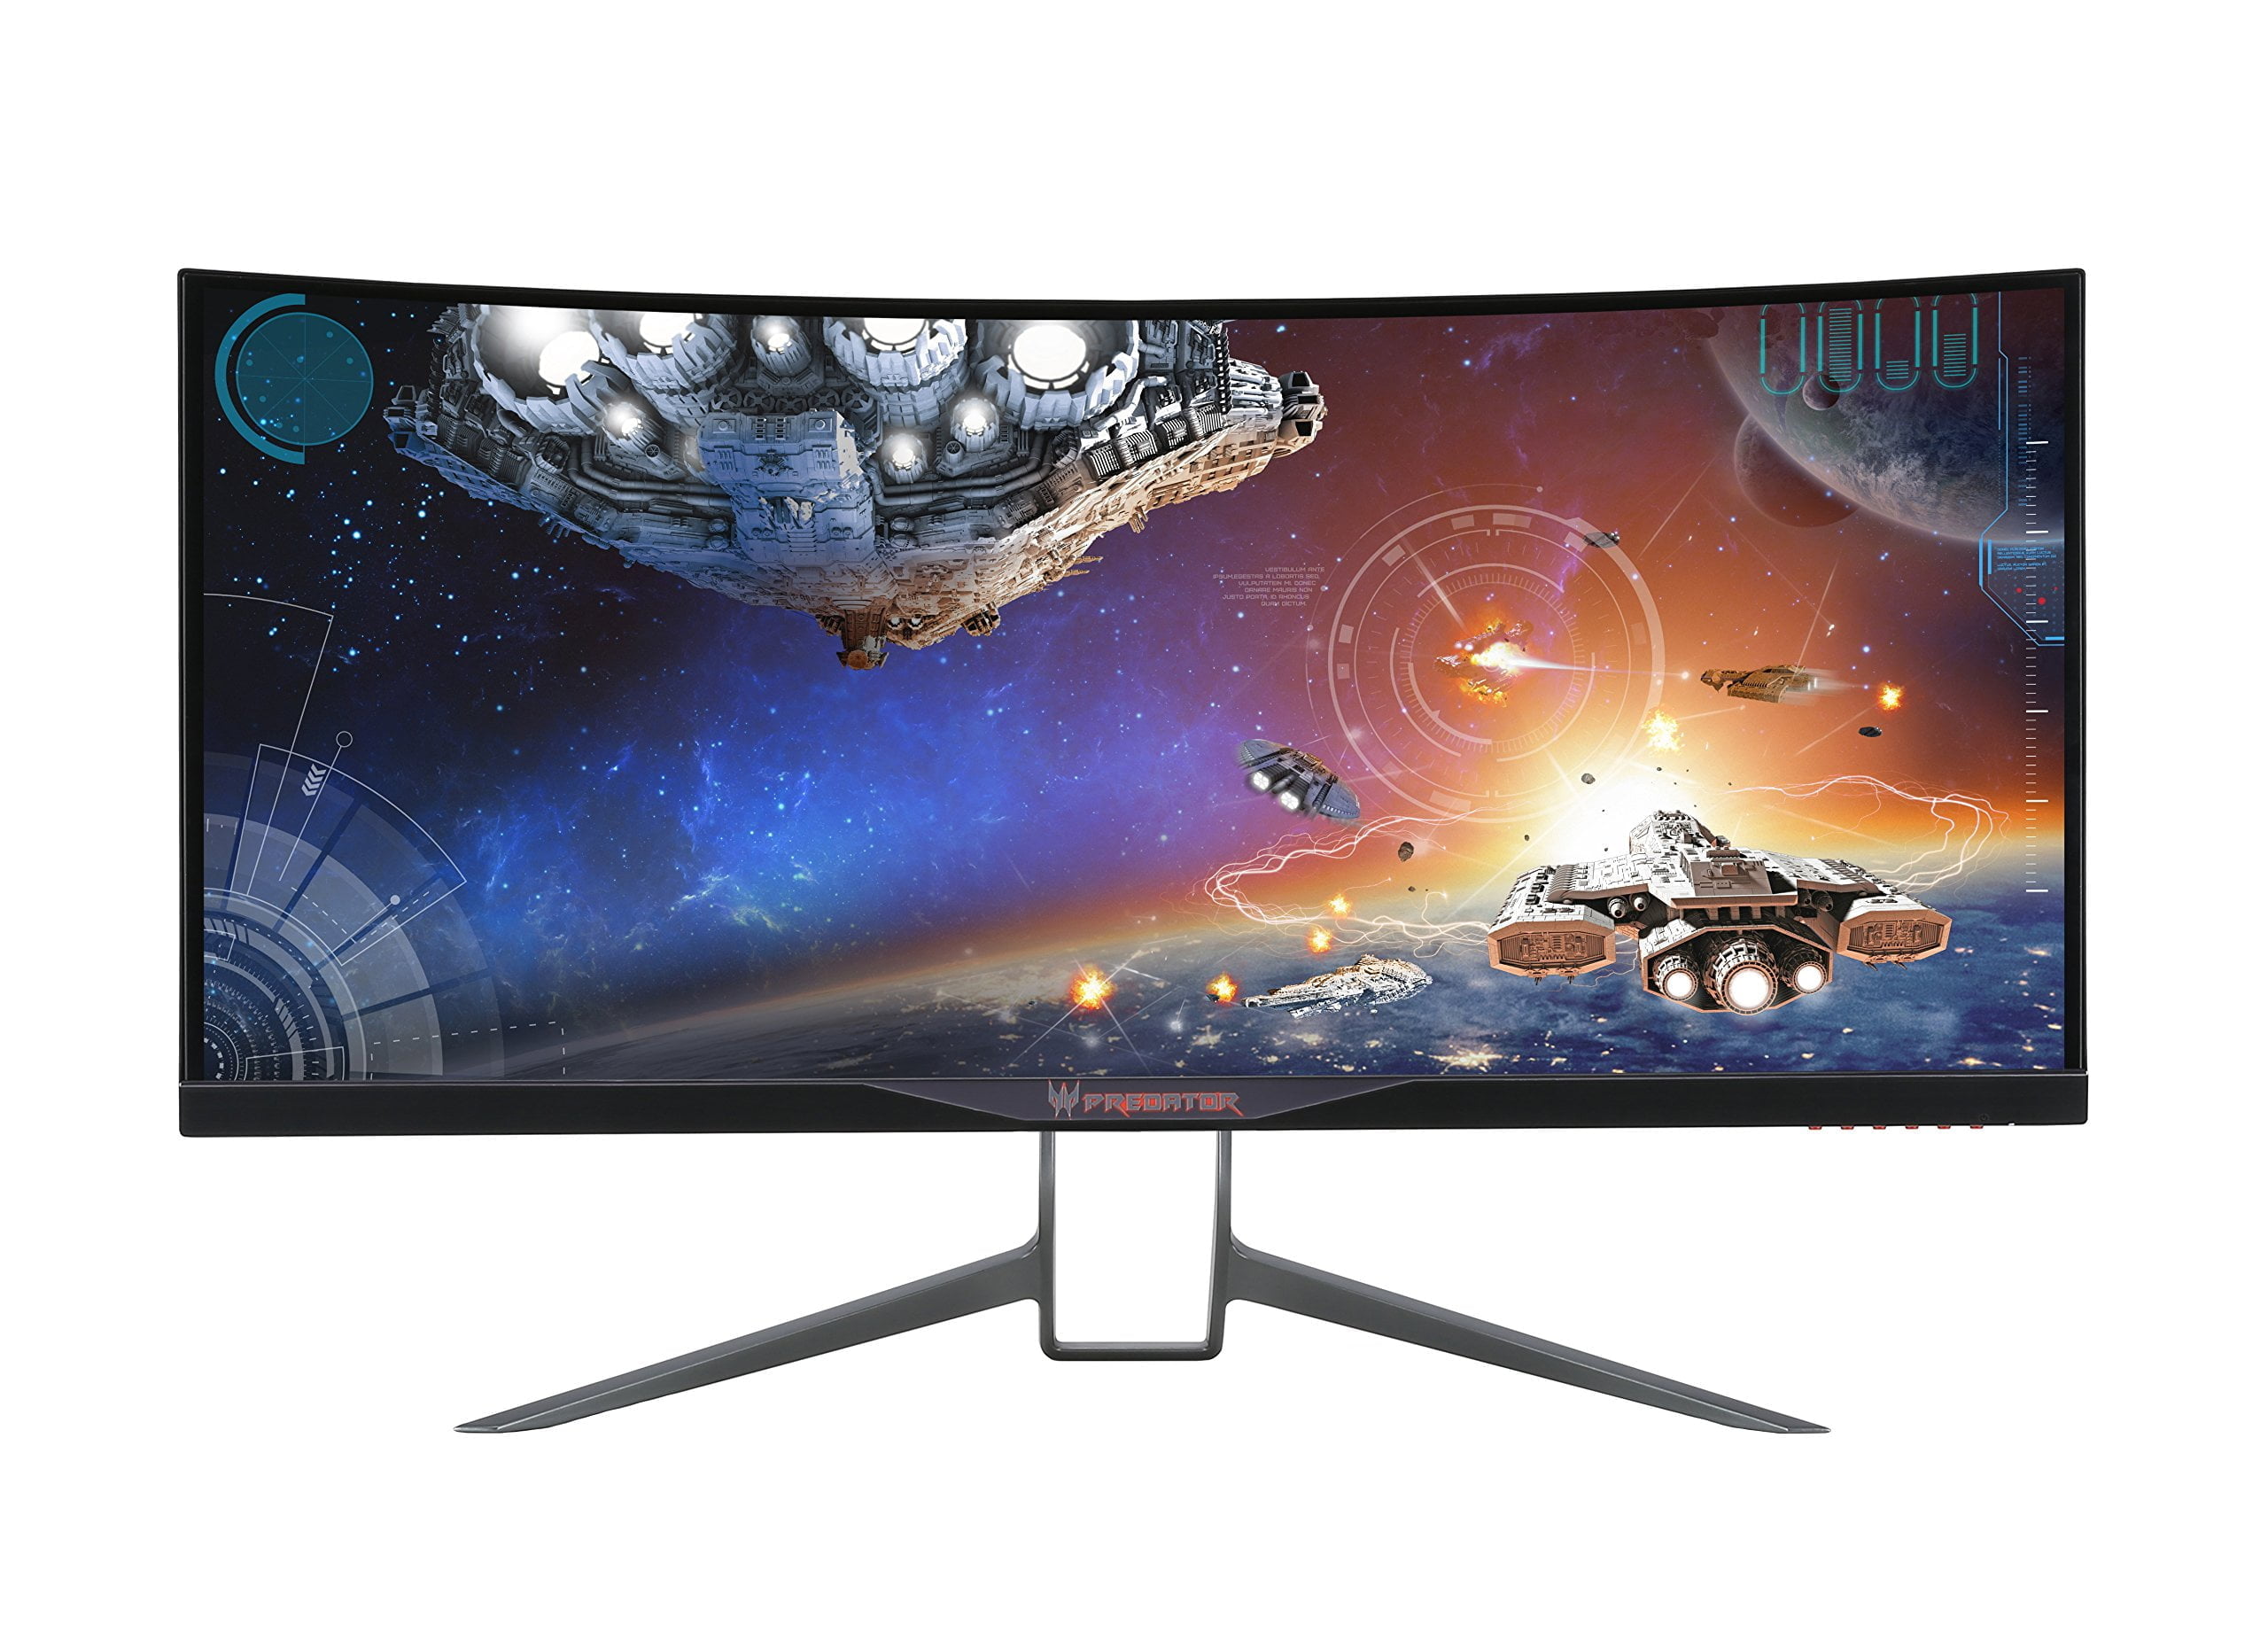 Acer Predator X34 Review and Specs: Display Done Right